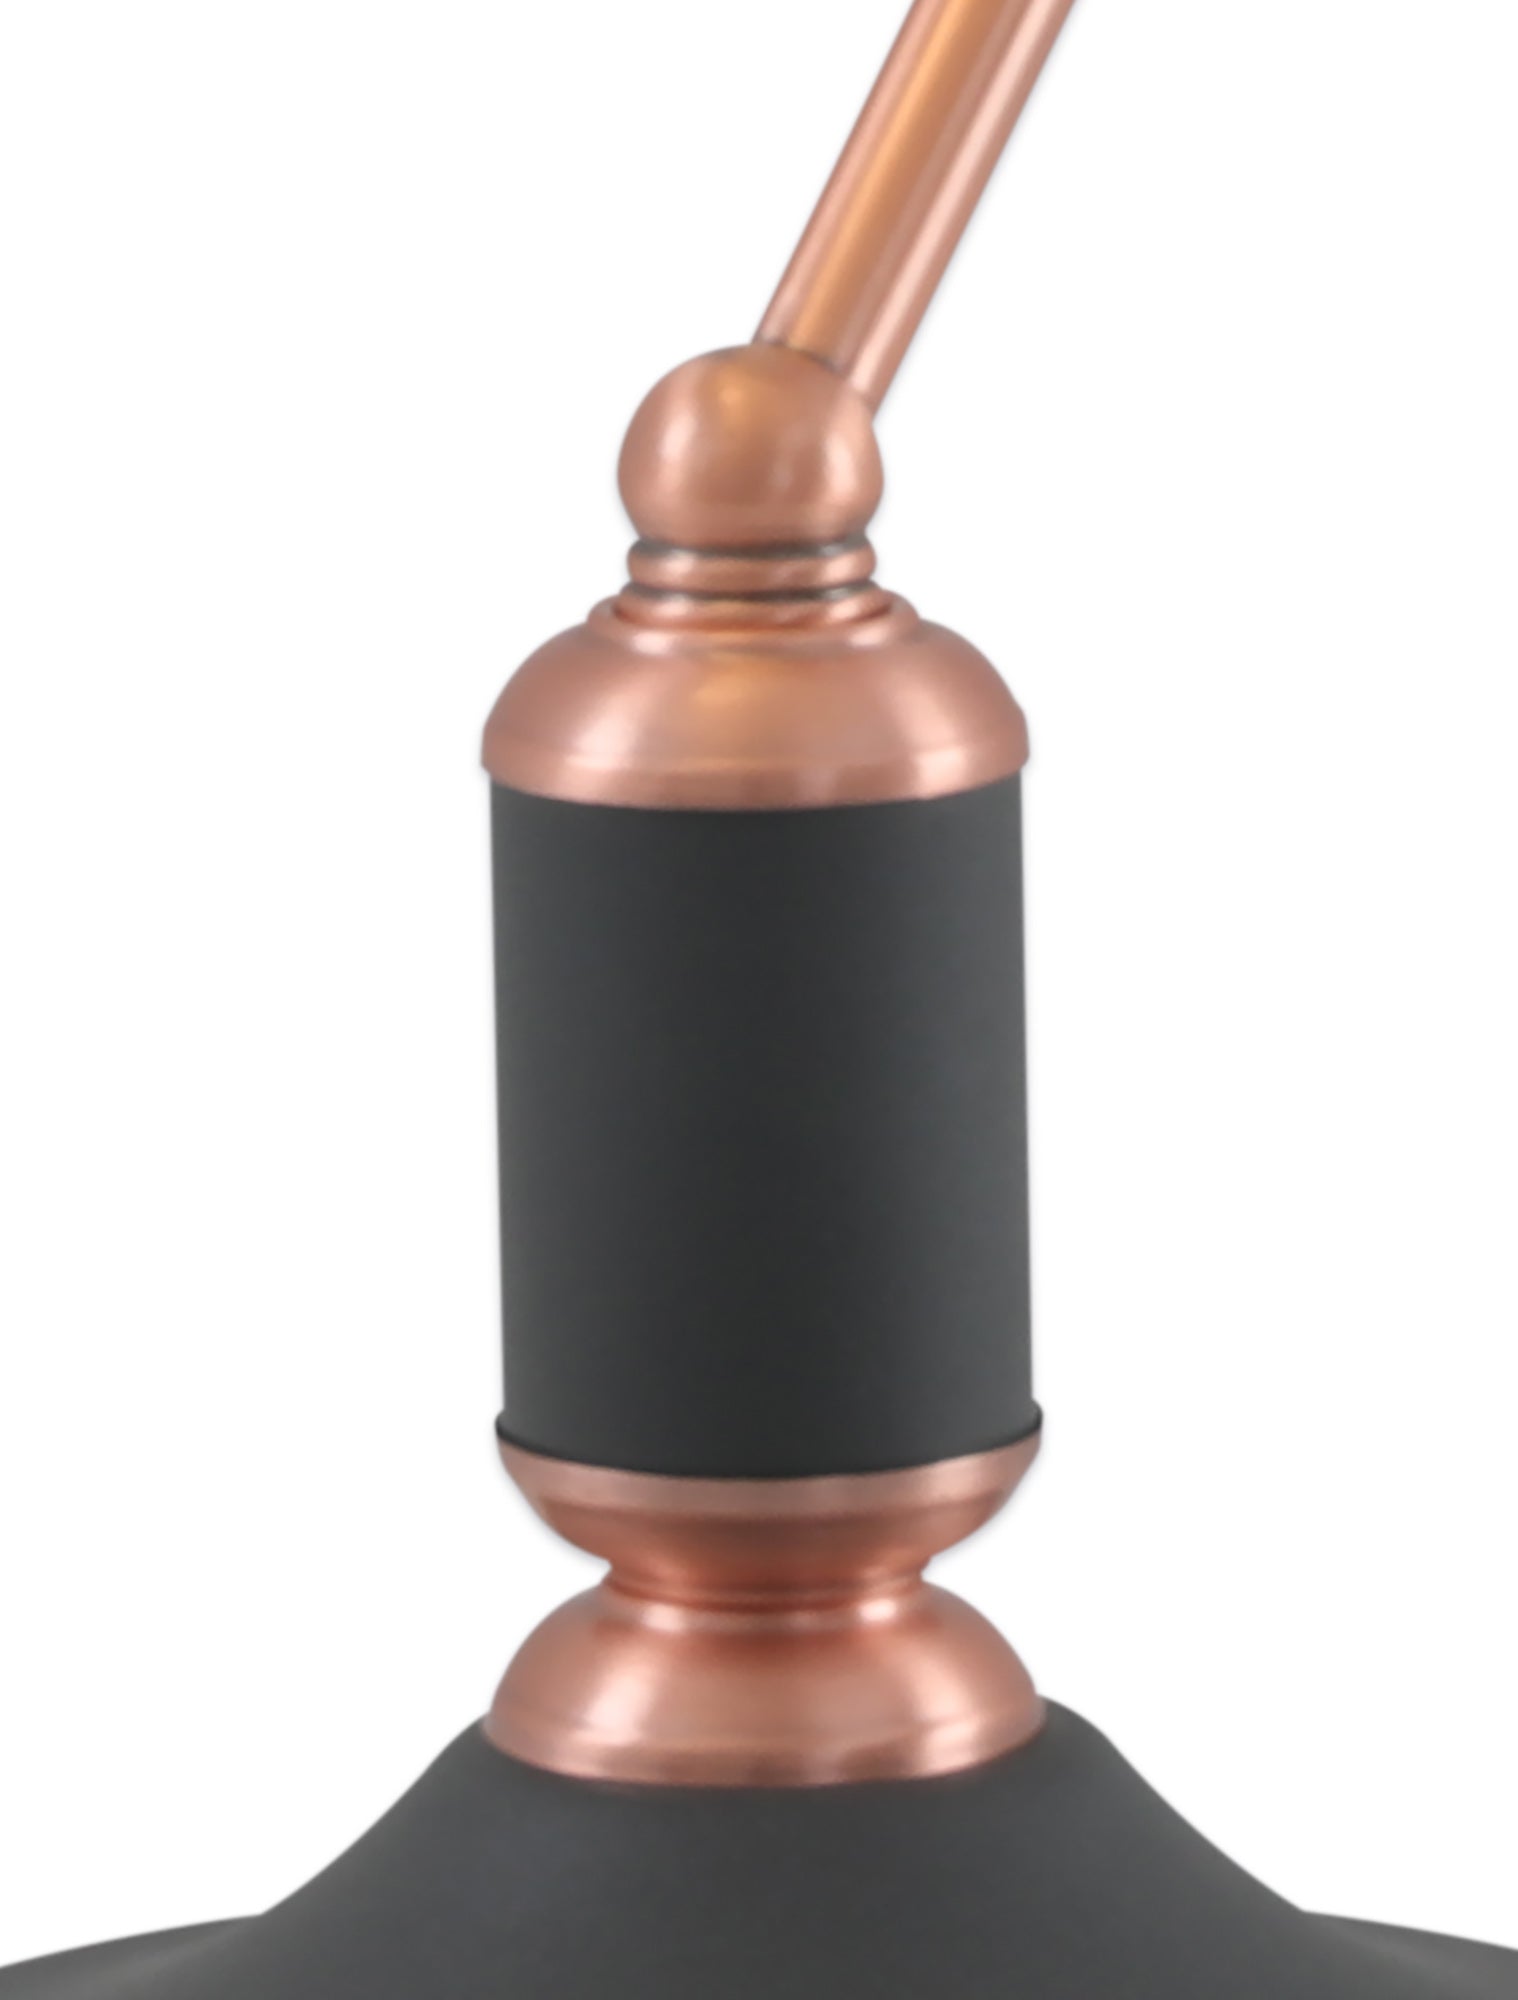 Banker Table Lamp 1 Light With Toggle Switch, Graphite/Copper